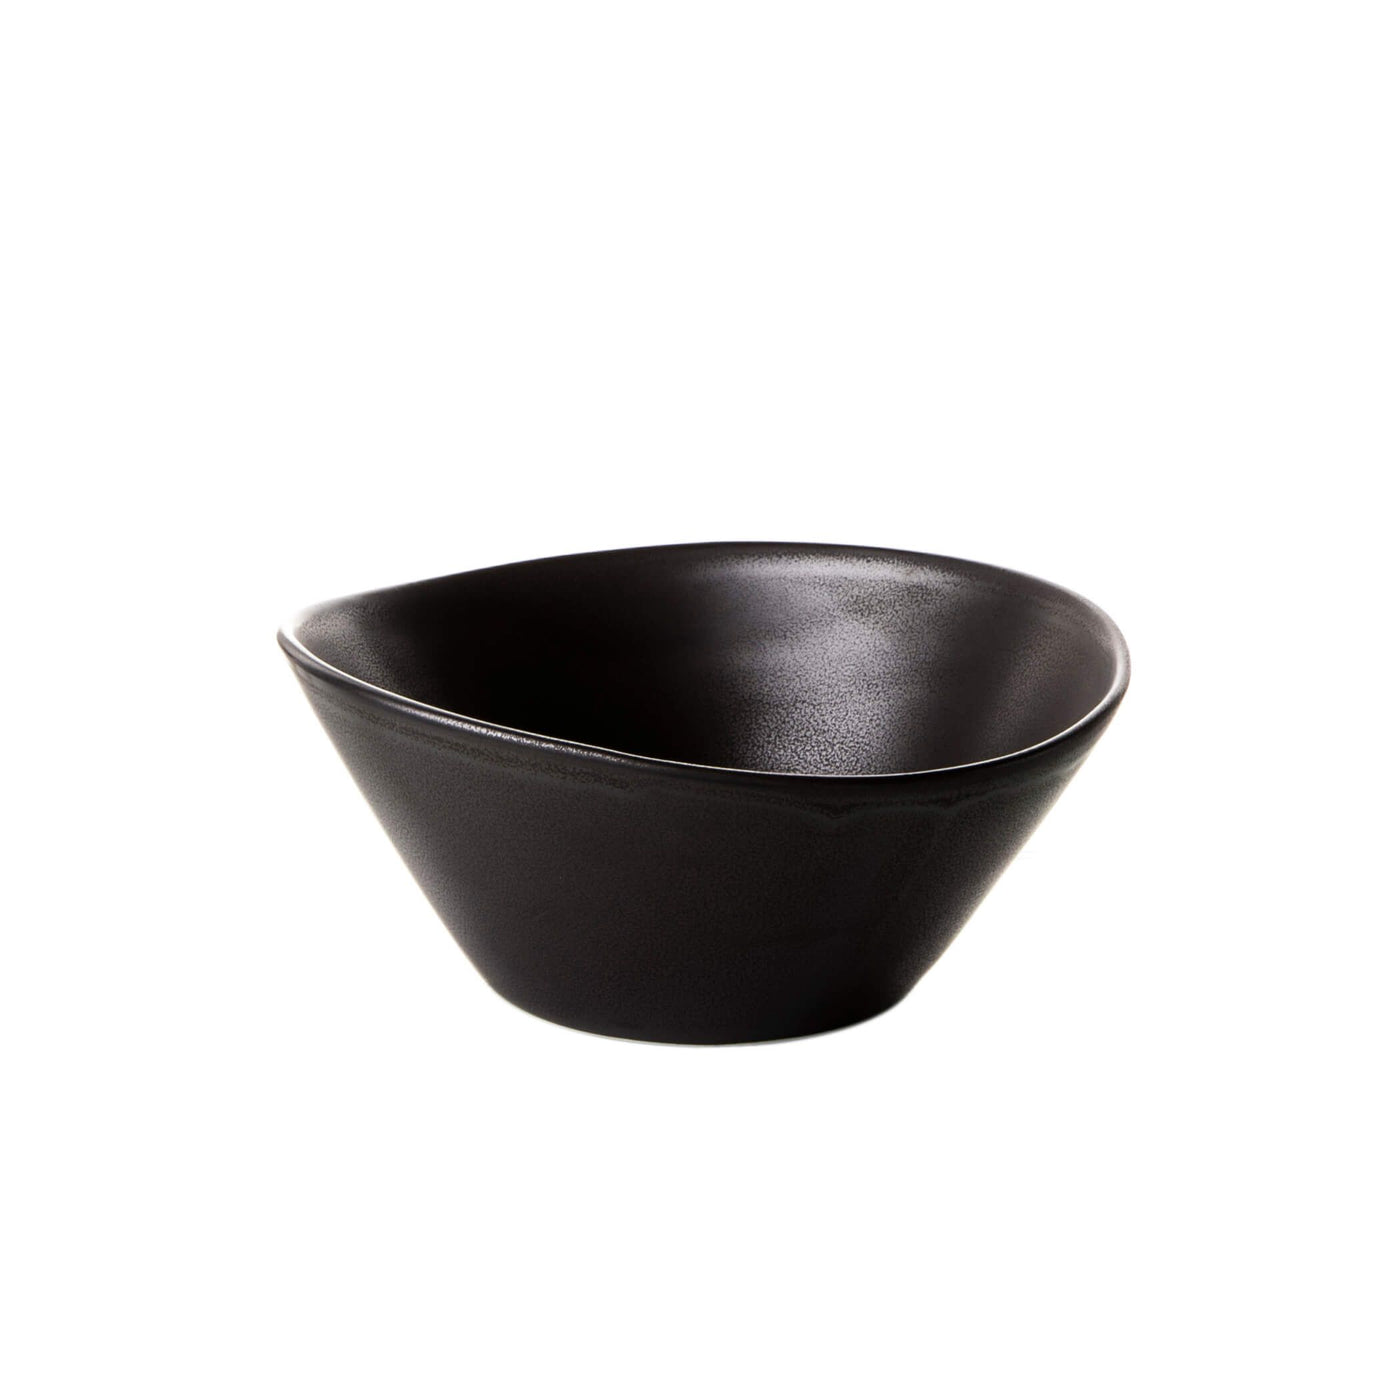 SIMON PEARCE BOWL BARRE POTTERY (Available in 2 Colors)